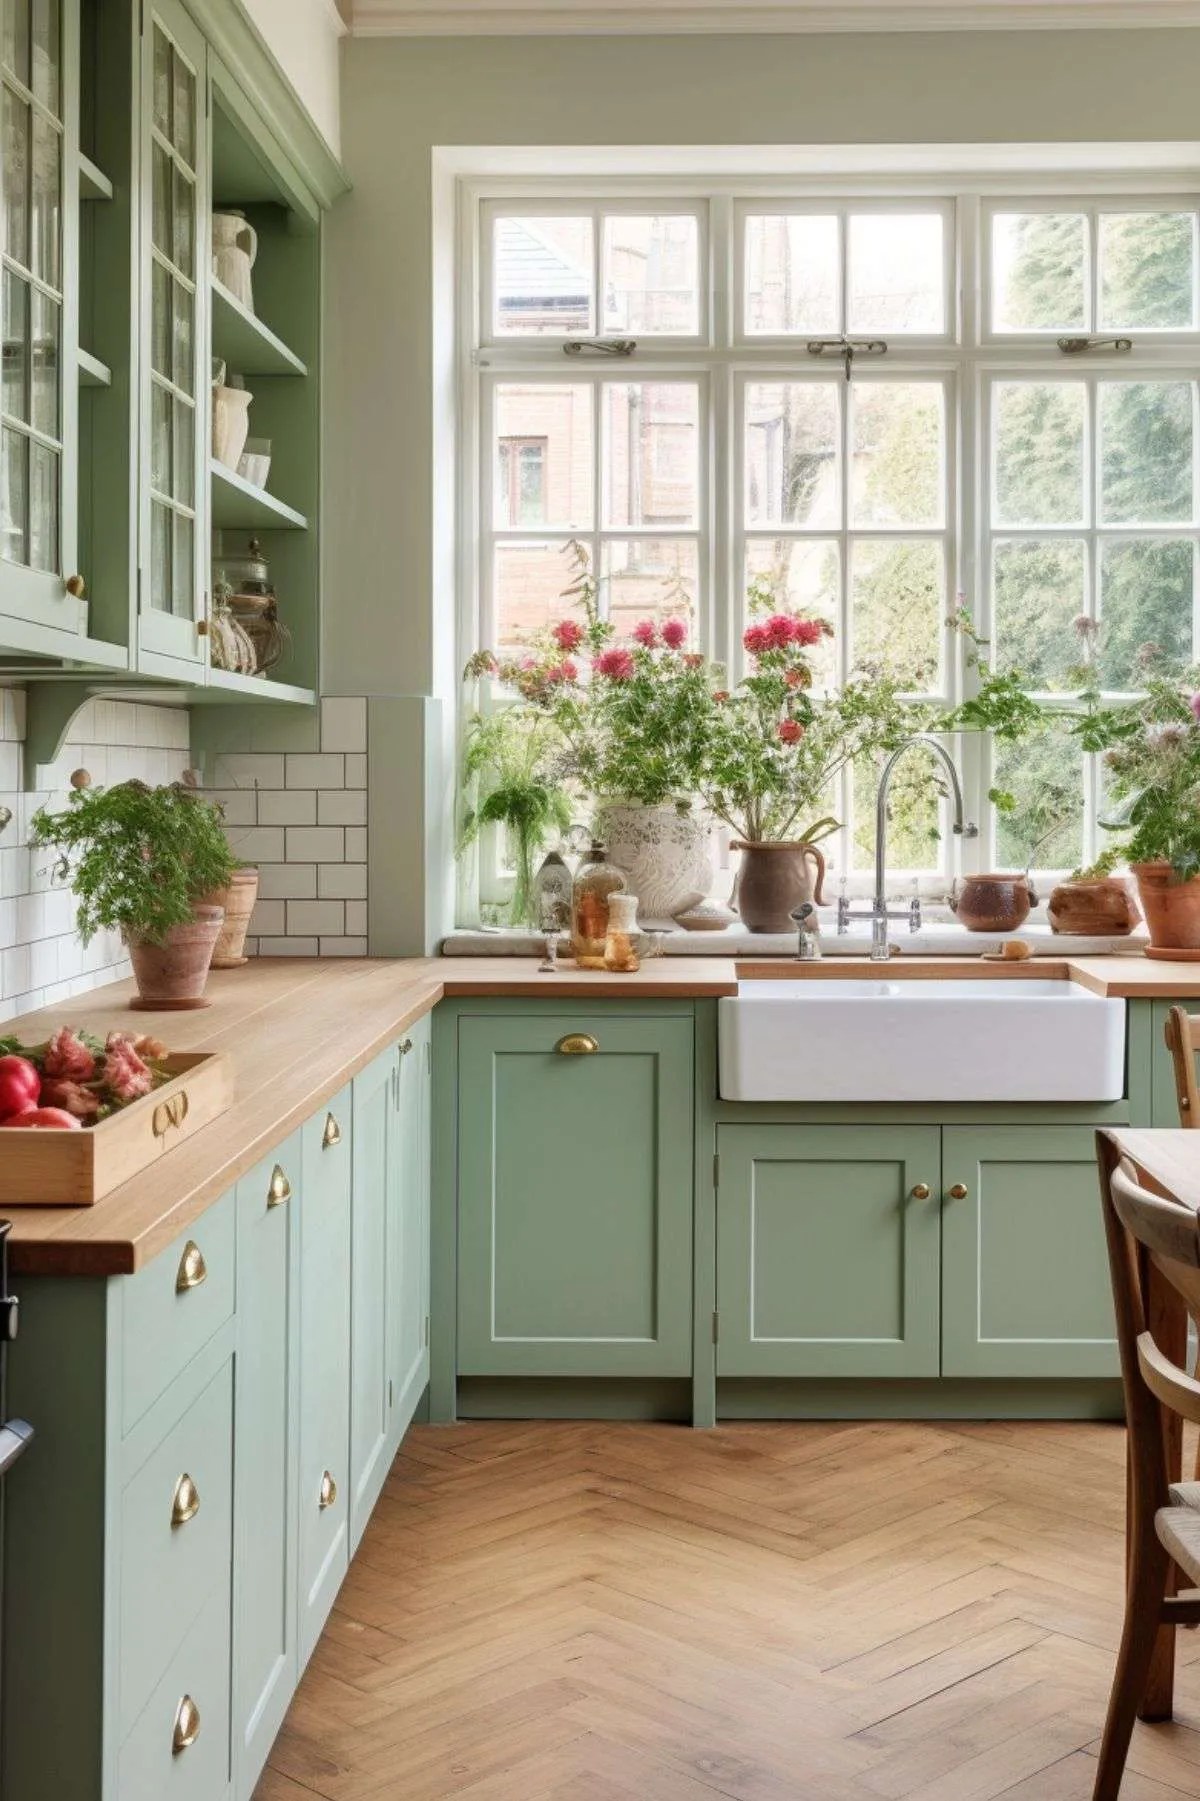 How to Design the Kitchen – Creating Your Perfect Domestic Playground